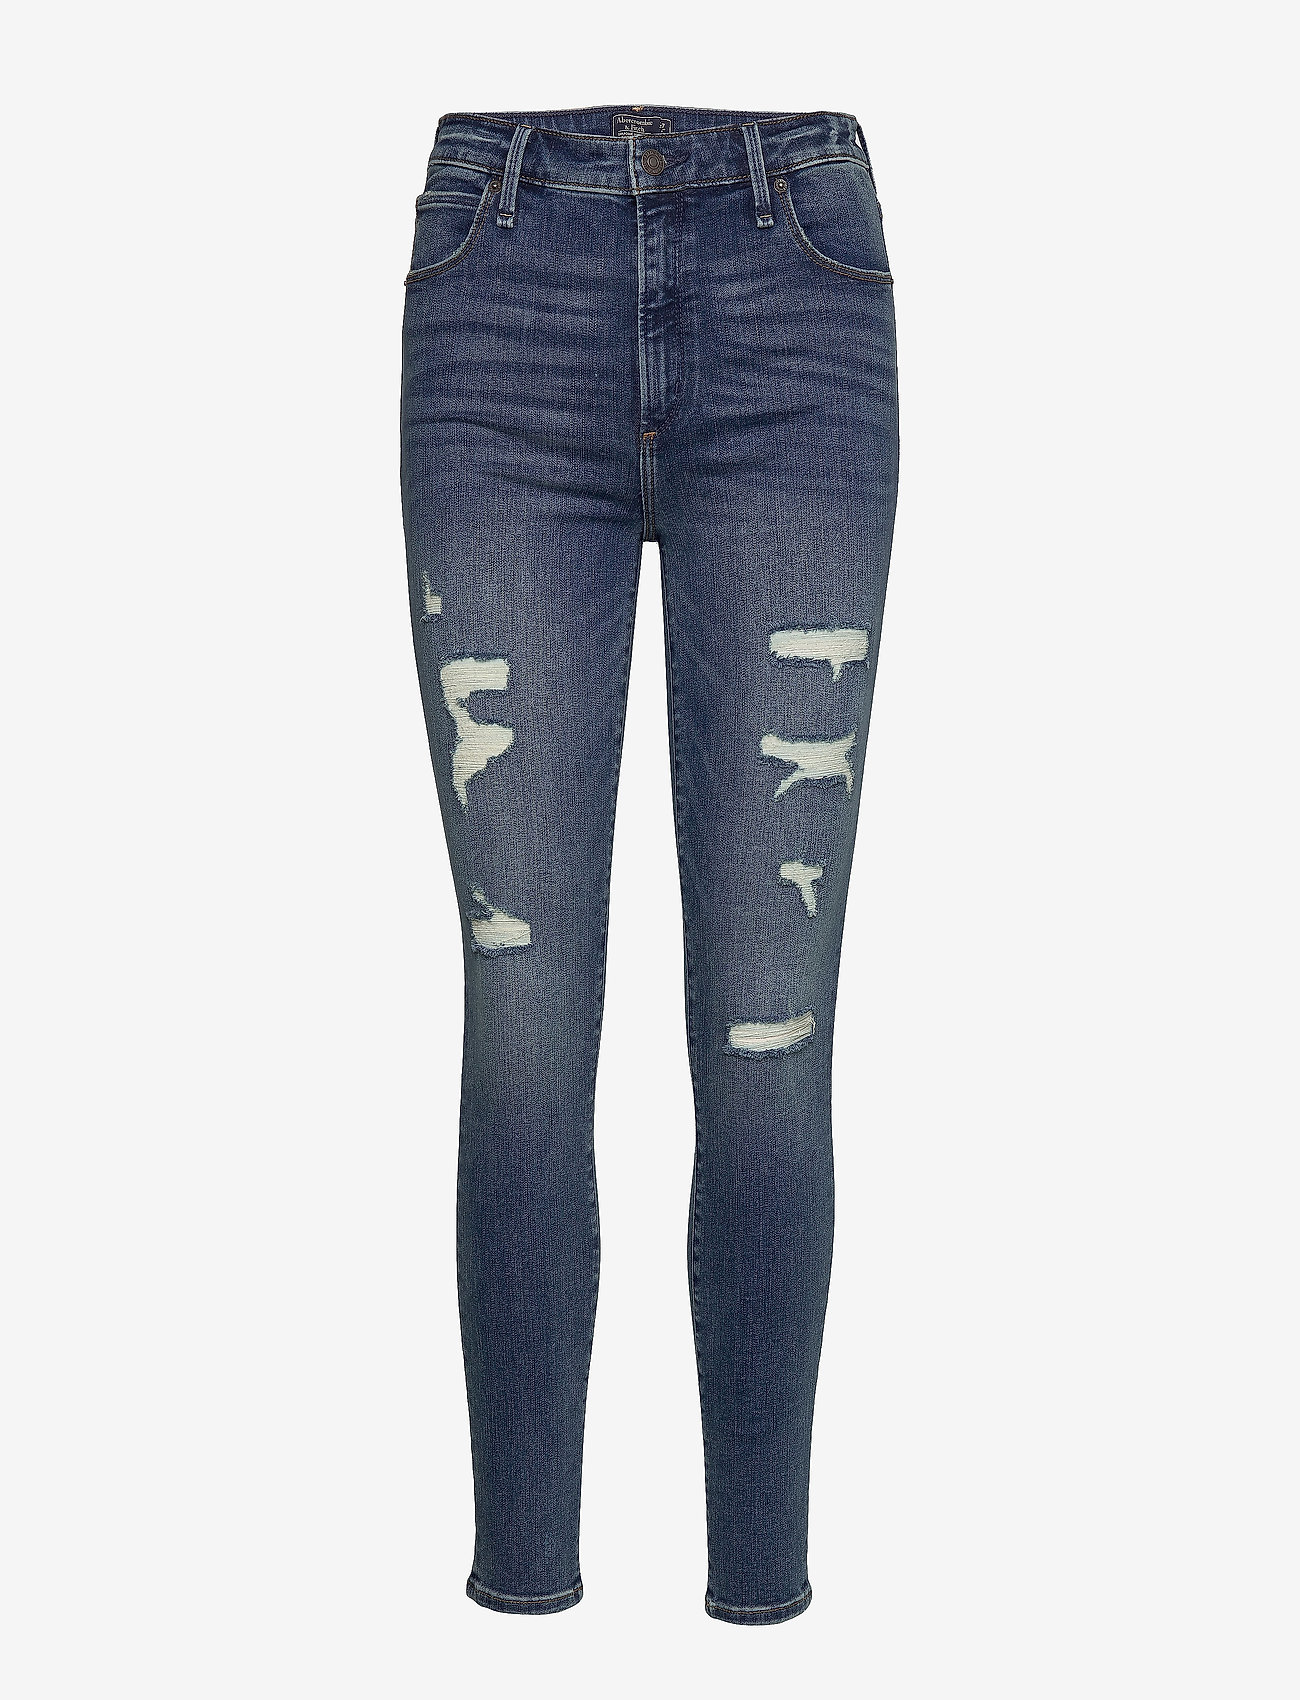 abercrombie & fitch high rise jeans